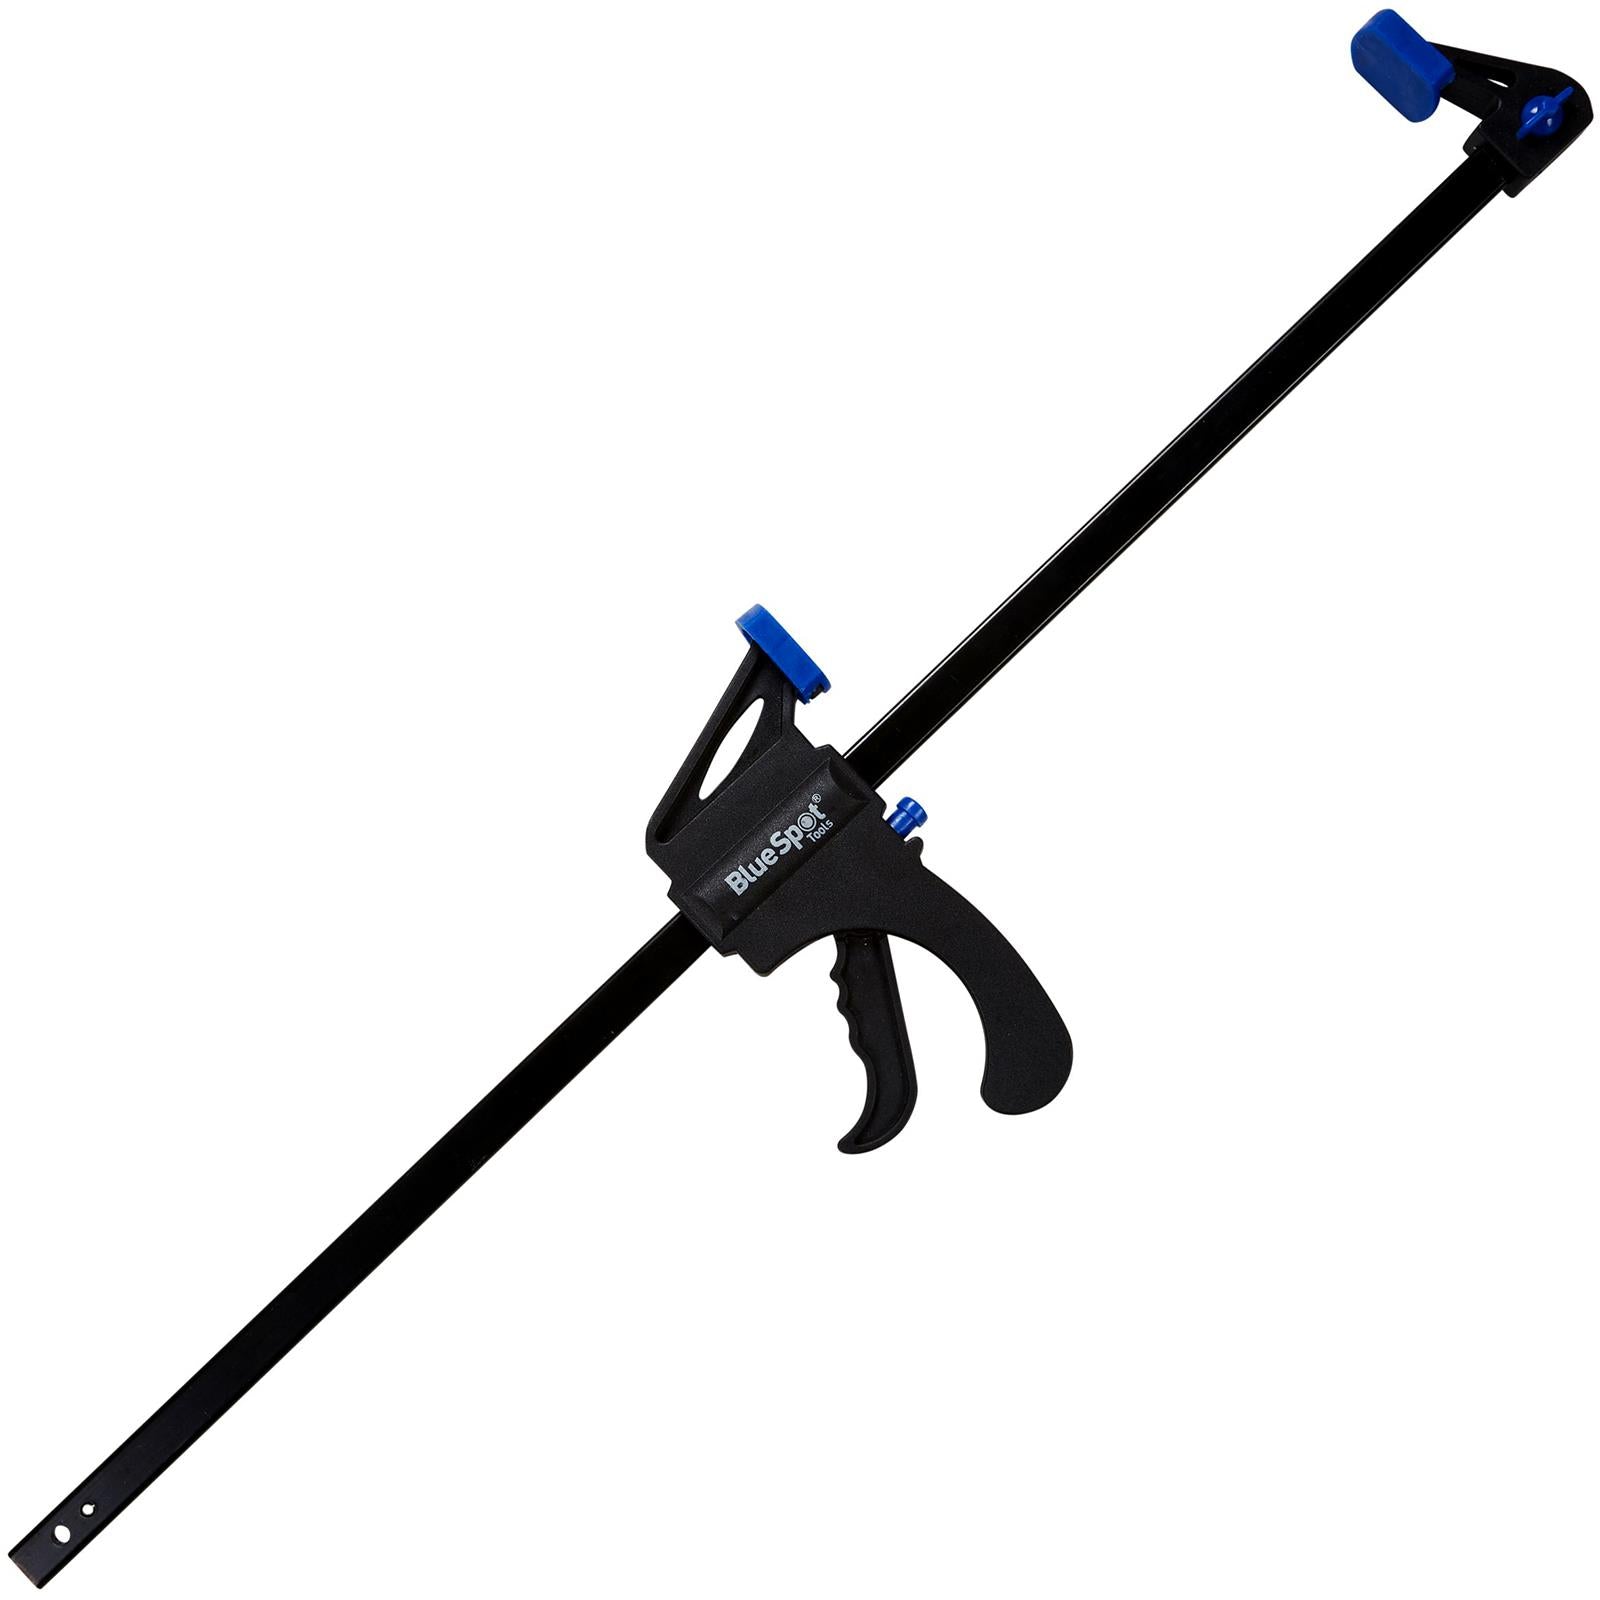 BlueSpot 24" Ratchet Speed Clamp and Spreader